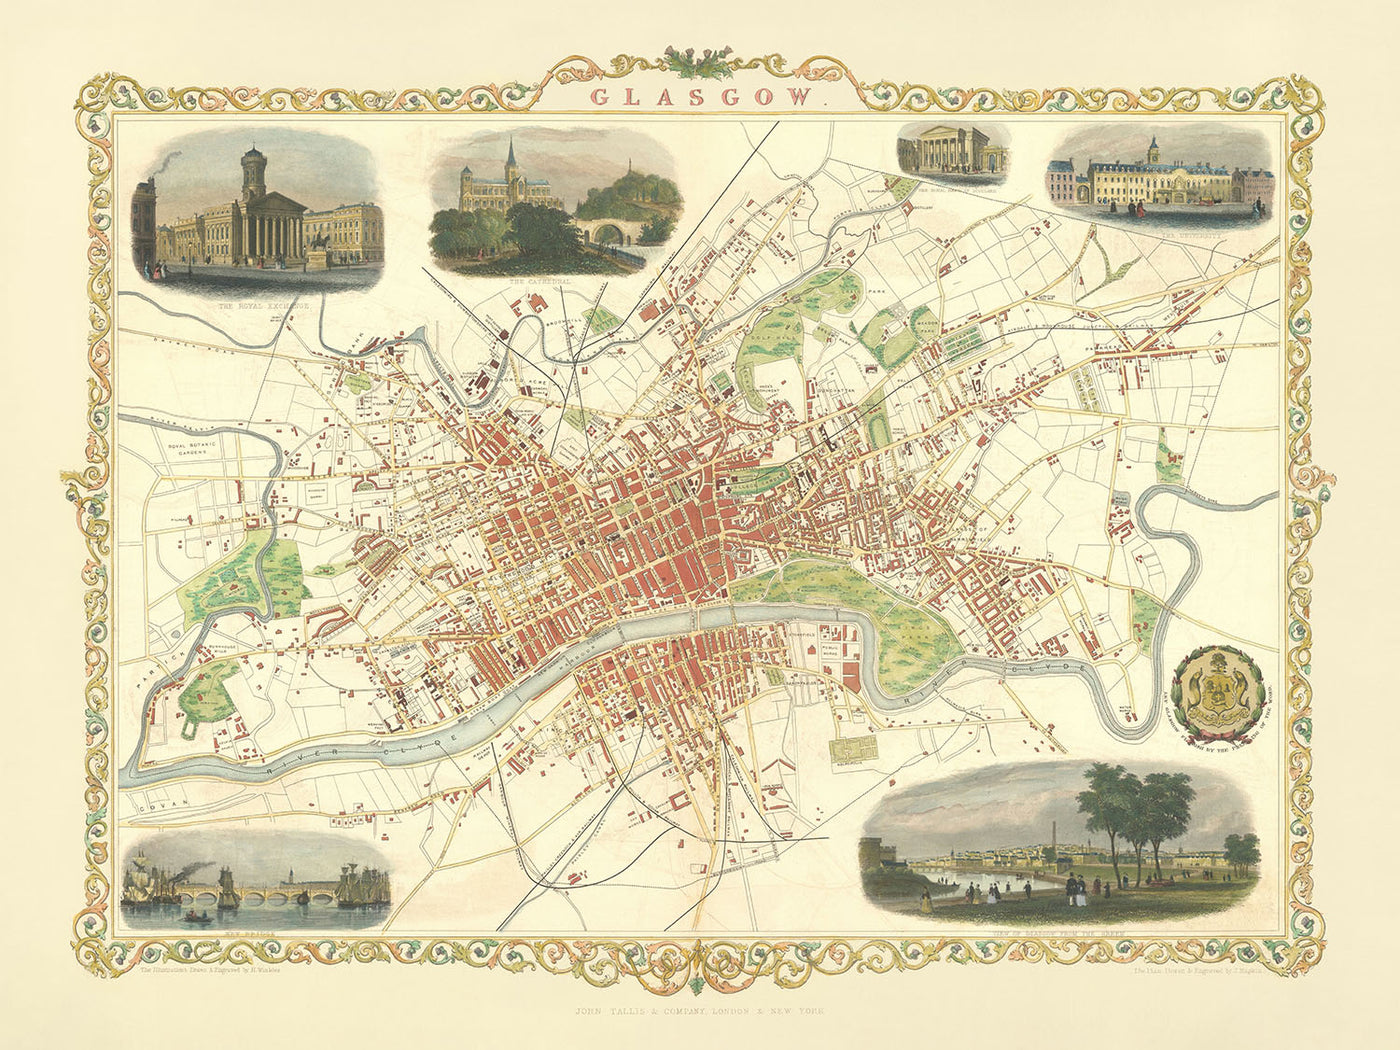 Old Map of Glasgow, 1851: Royal Exchange, University, Necropolis, River Clyde, Glasgow Green